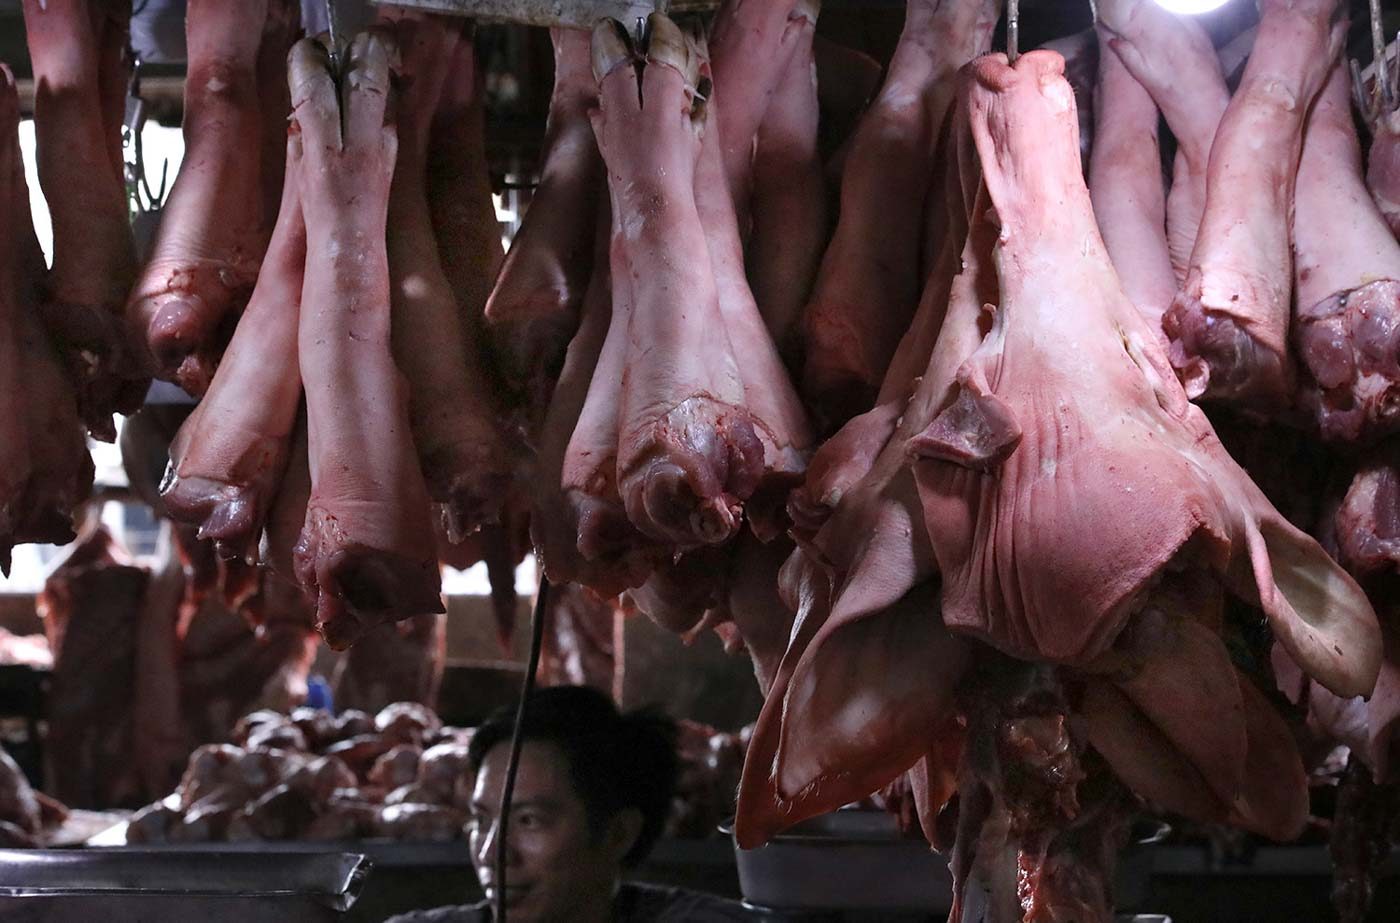 ‘Pork holiday’: Some vendors stop selling as price cap starts